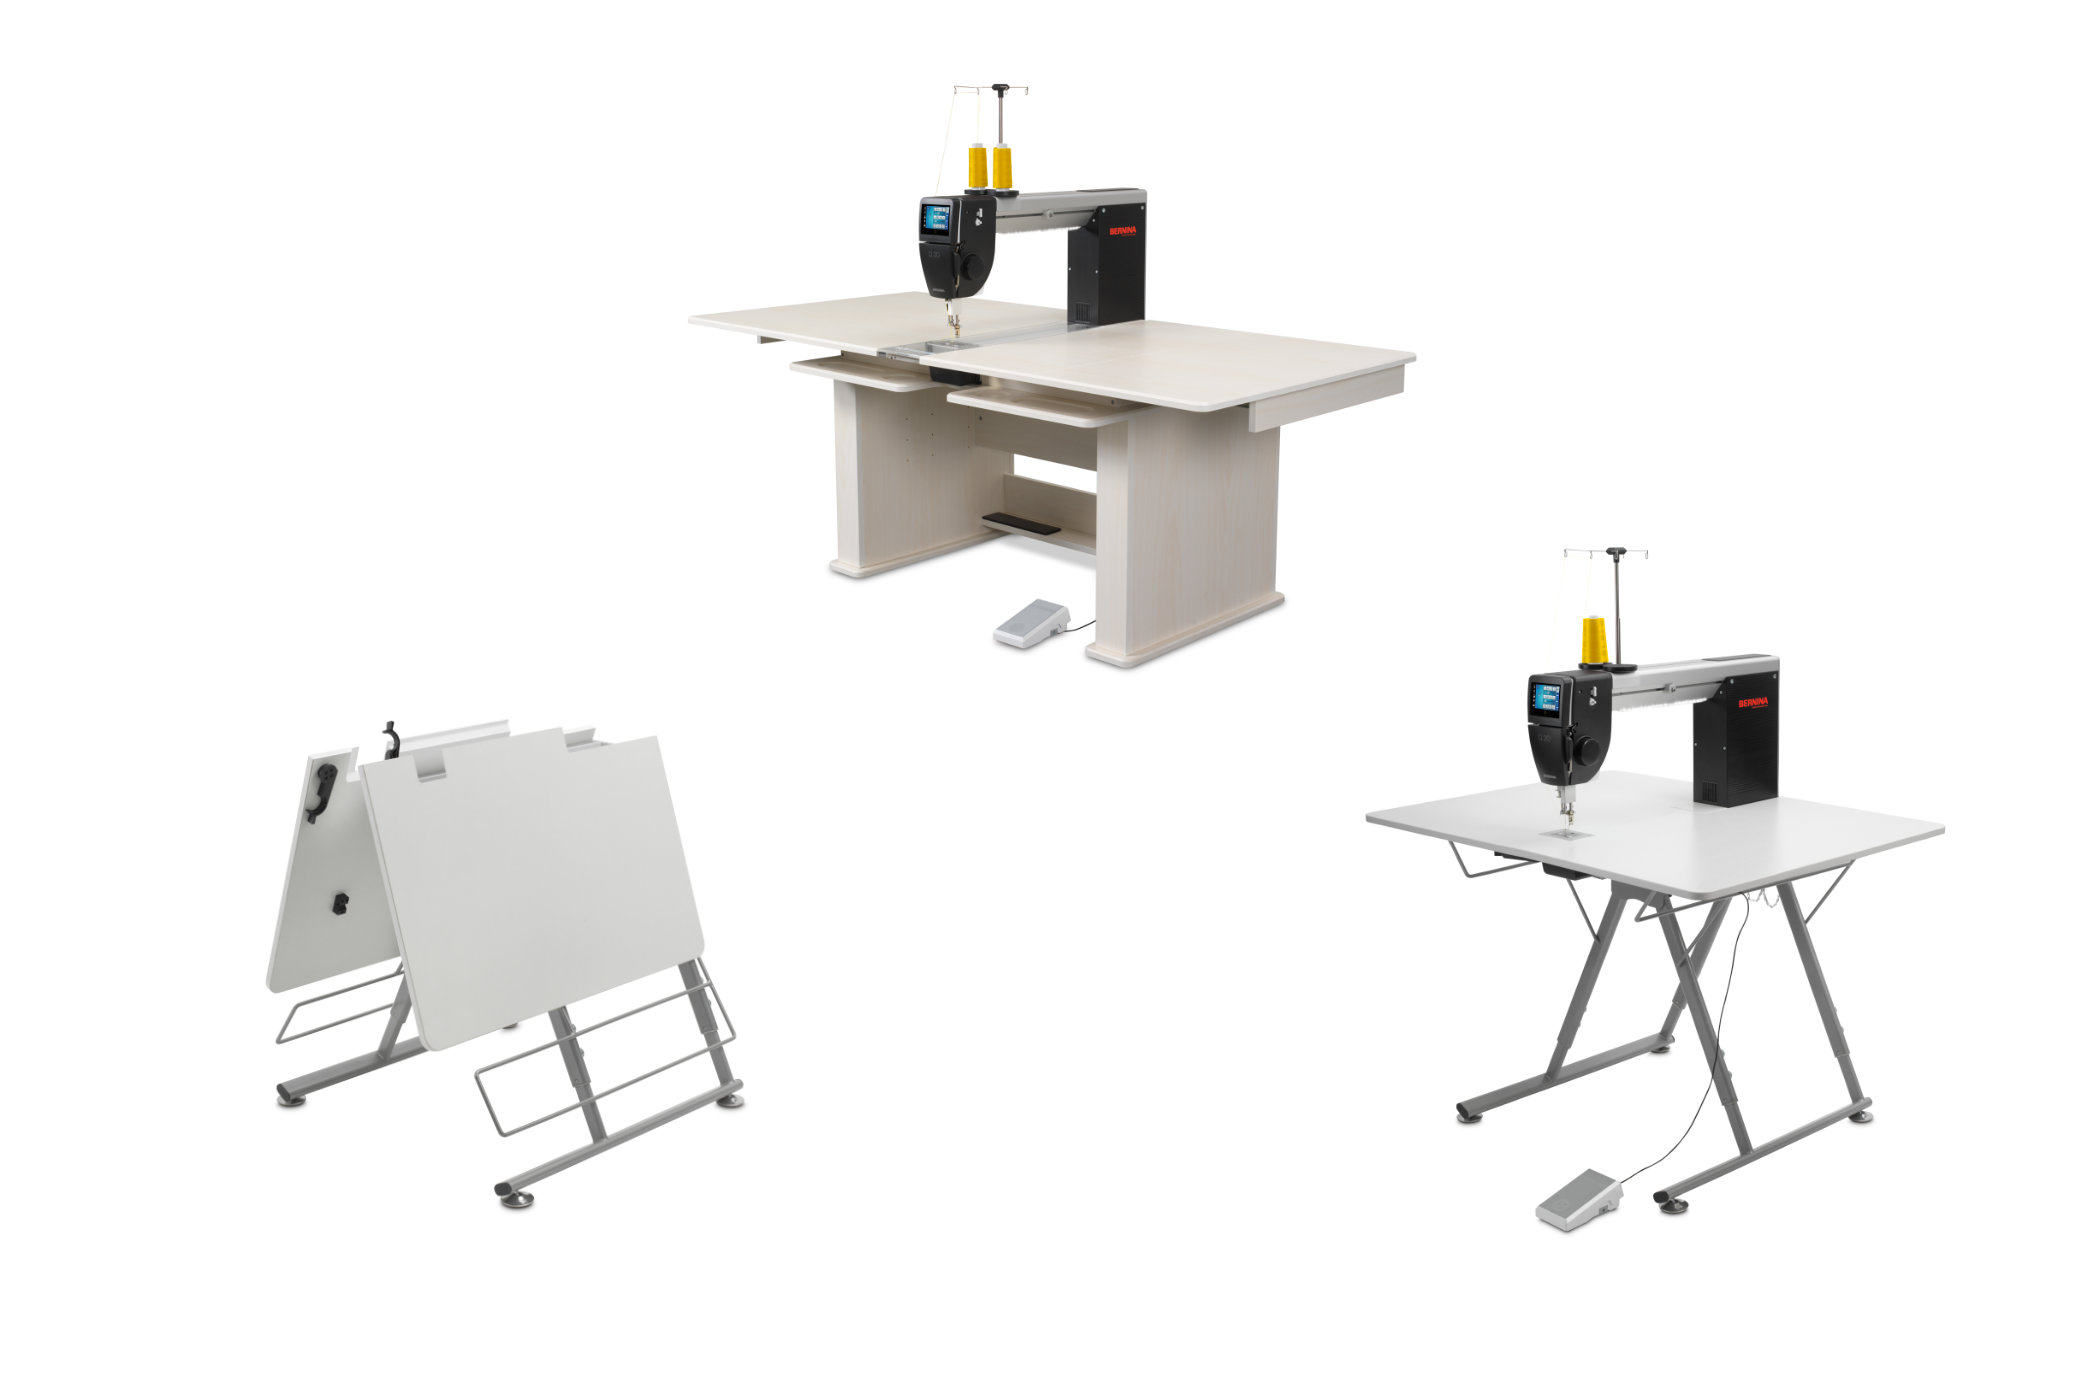 Sit Down Table Options